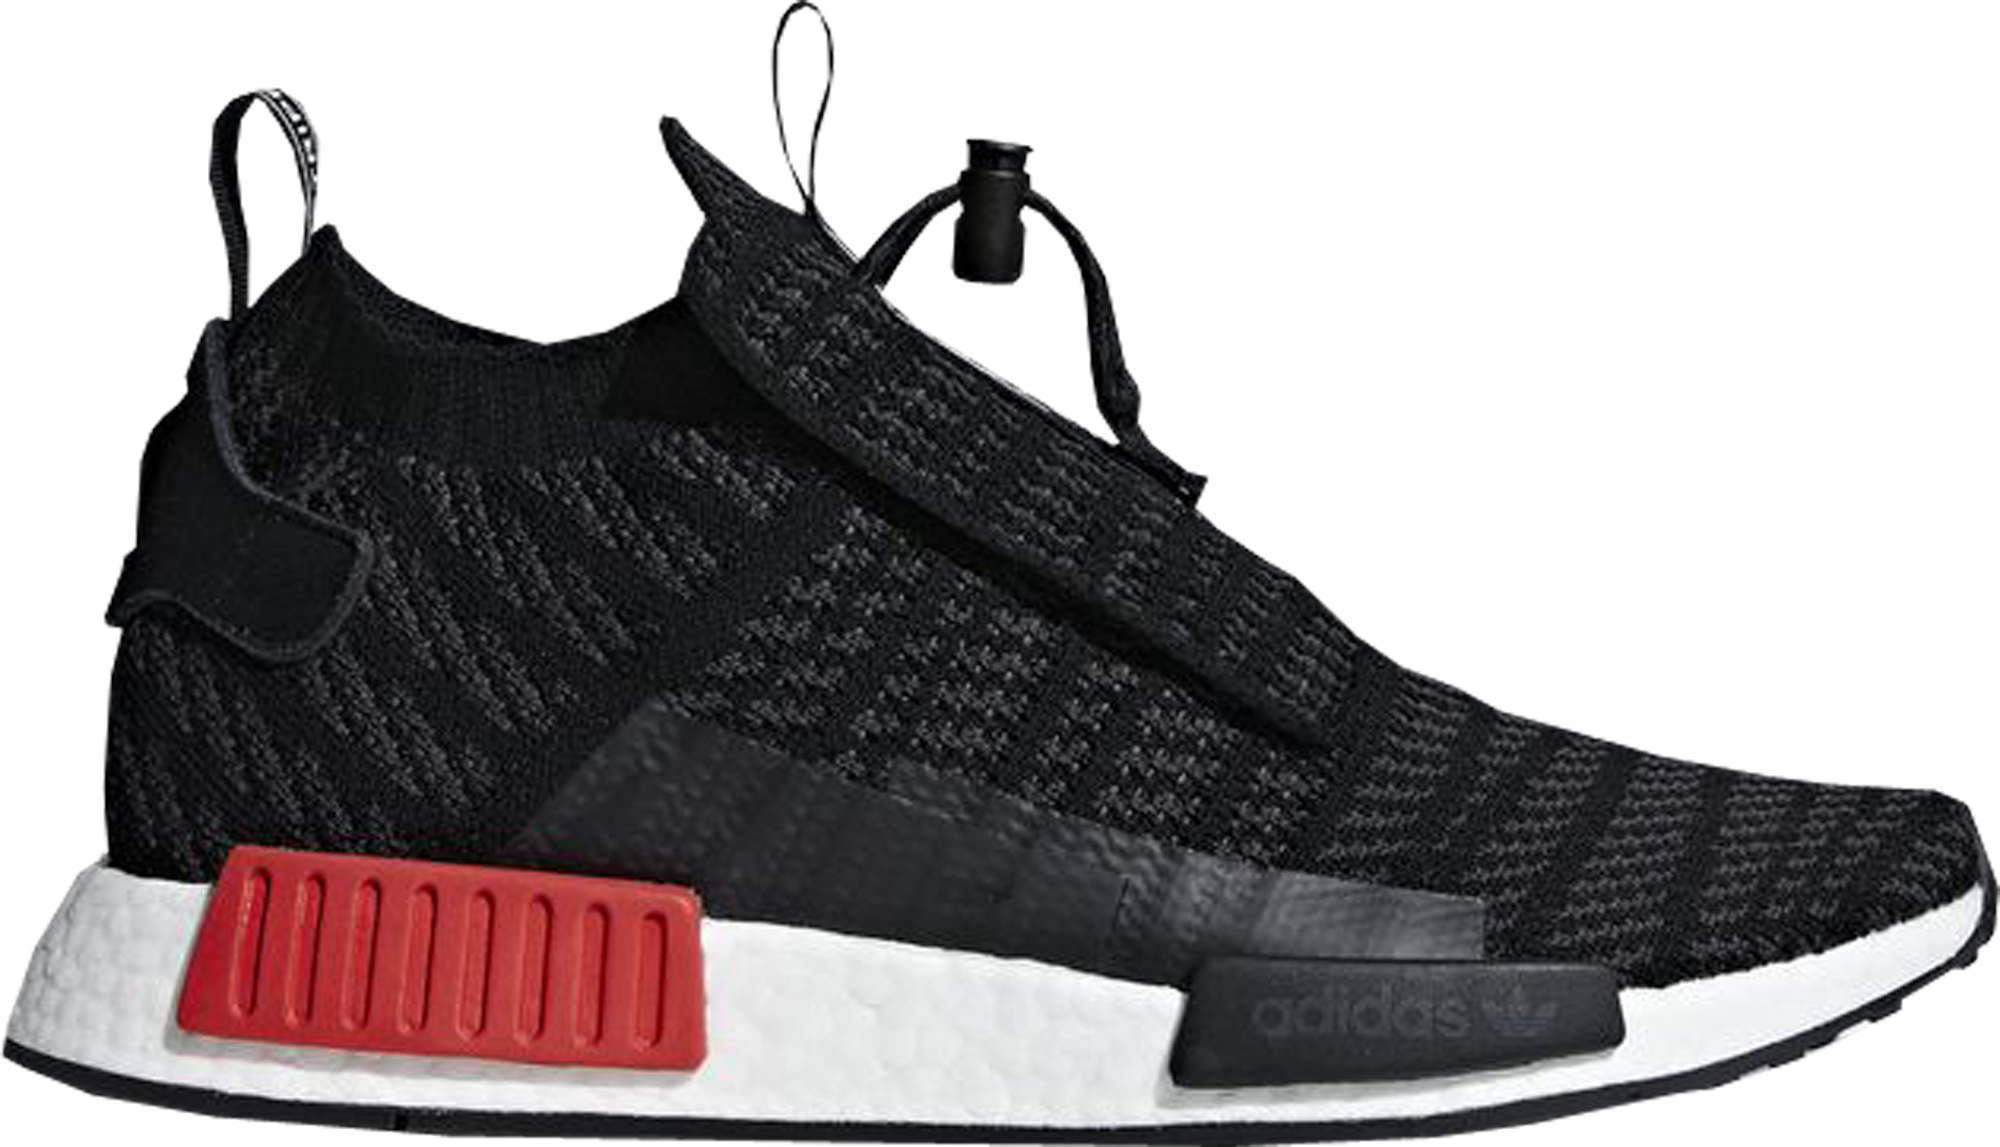 adidas NMD TS1 Shoes \u0026 Deadstock Sneakers